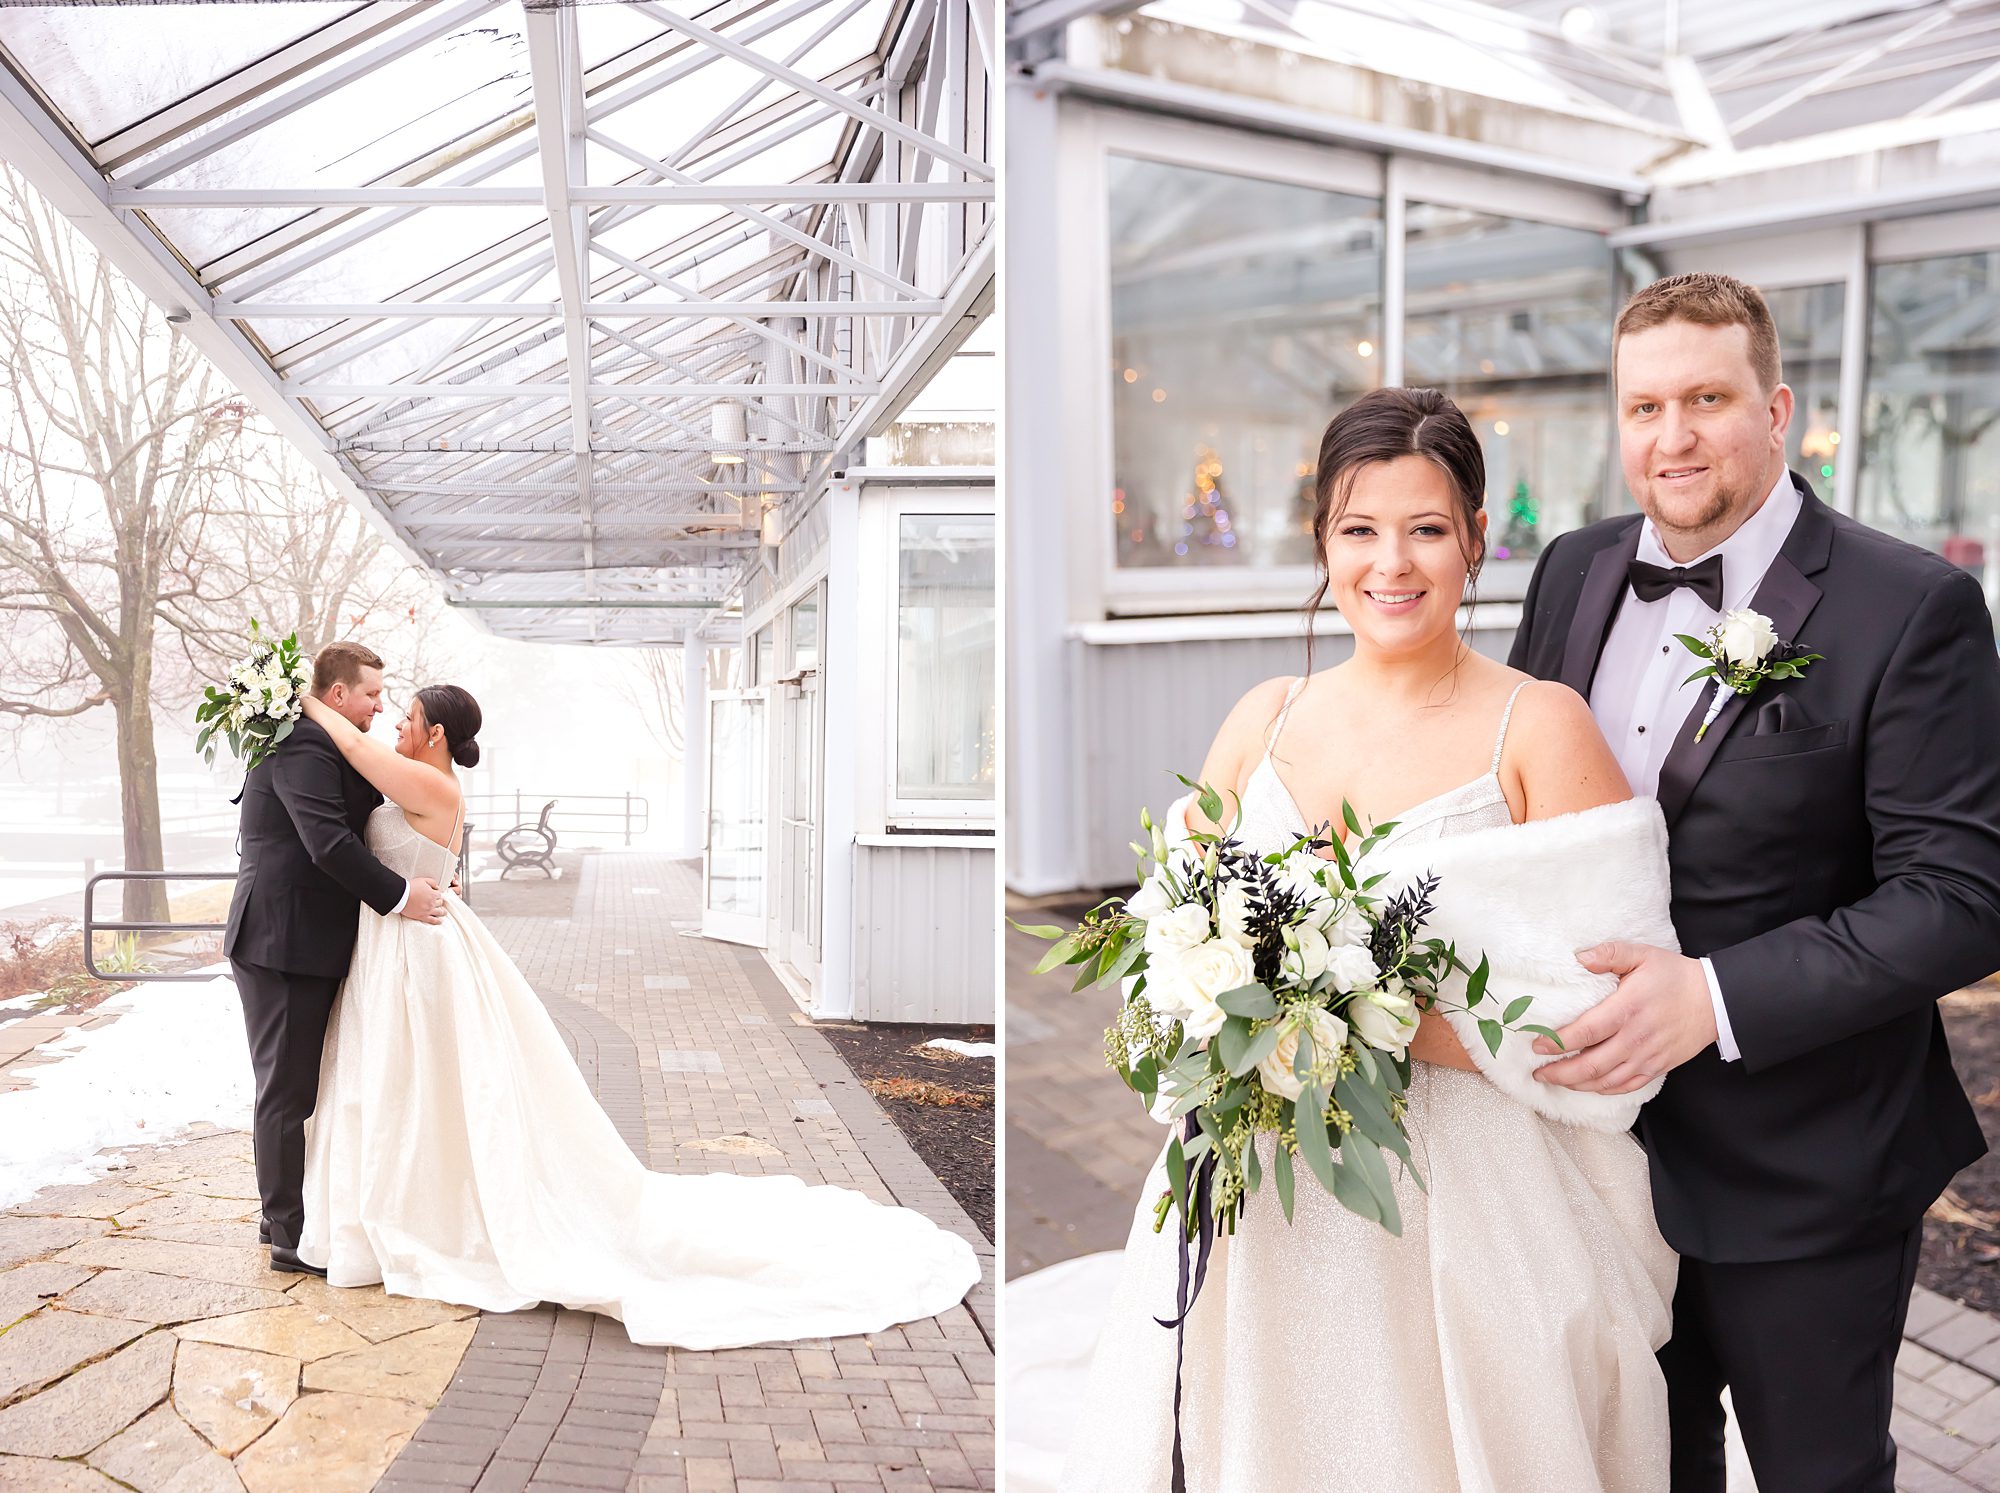 Bride and Groom portraits for winter wedding in Perth, ON